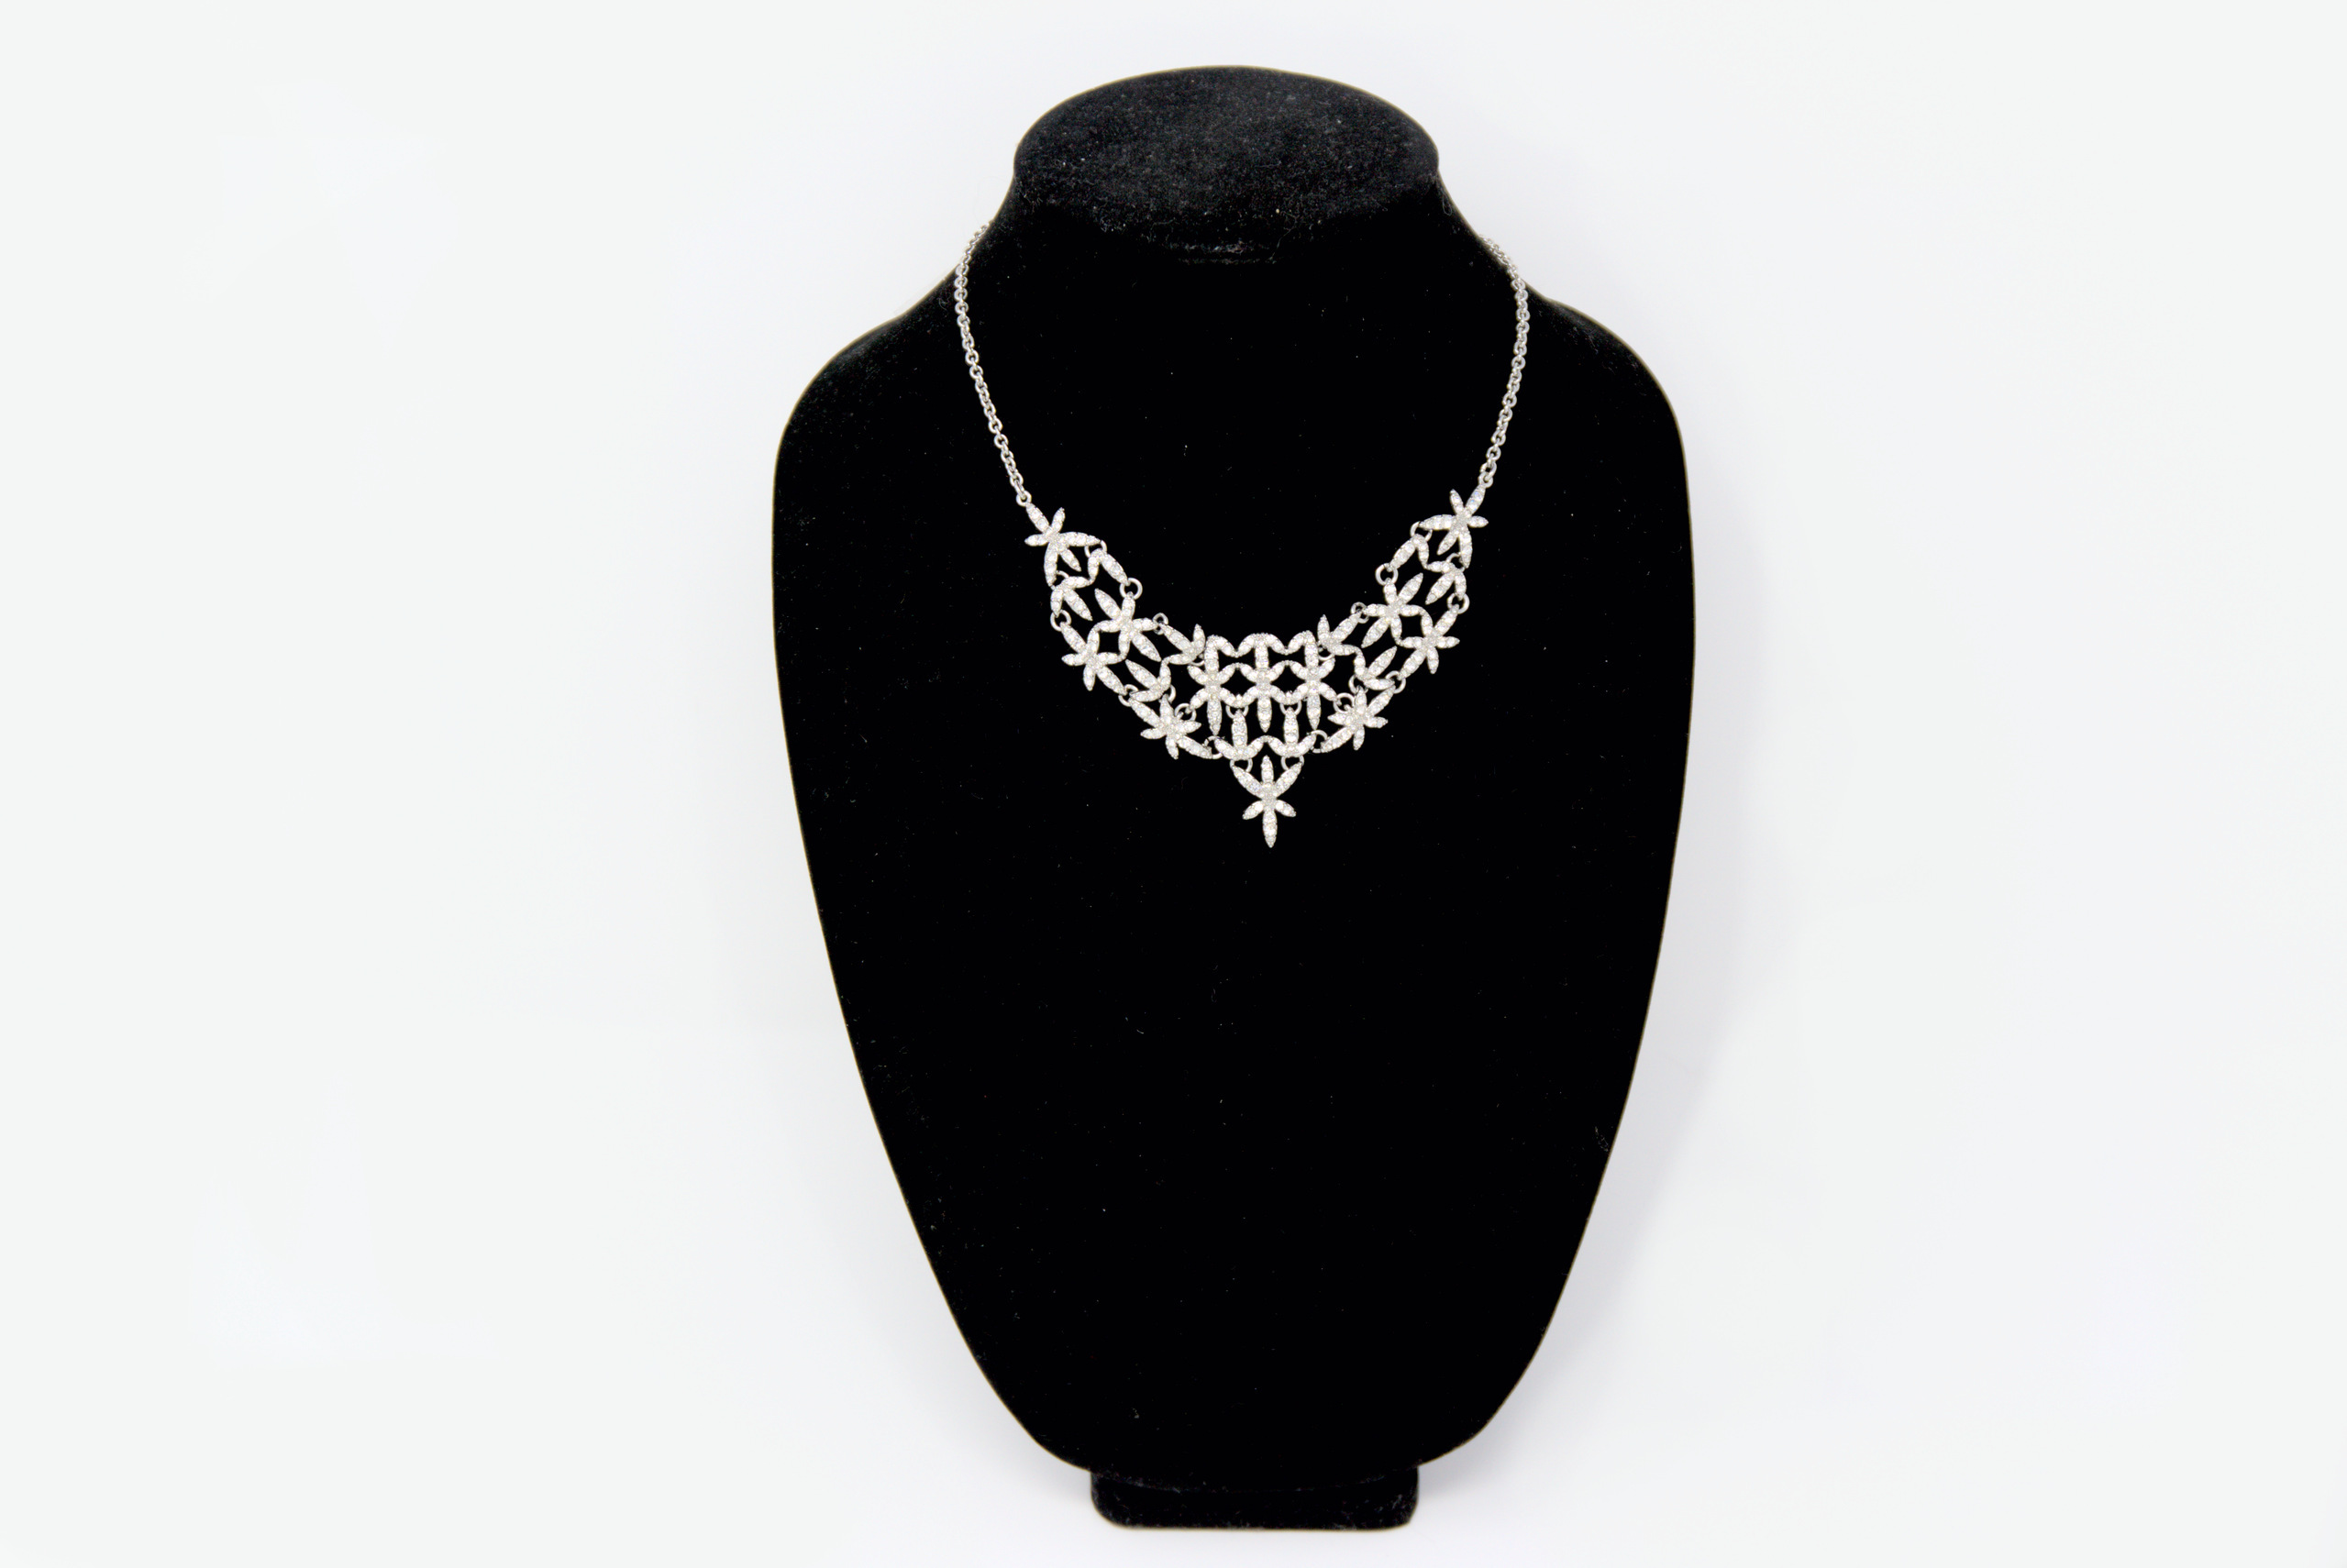 Charm & Lovely Quality Fashion Accessories introduces International Concept INC Silver-Tone Pave Star Statement Necklace, 16" inches + 3" inch Extender